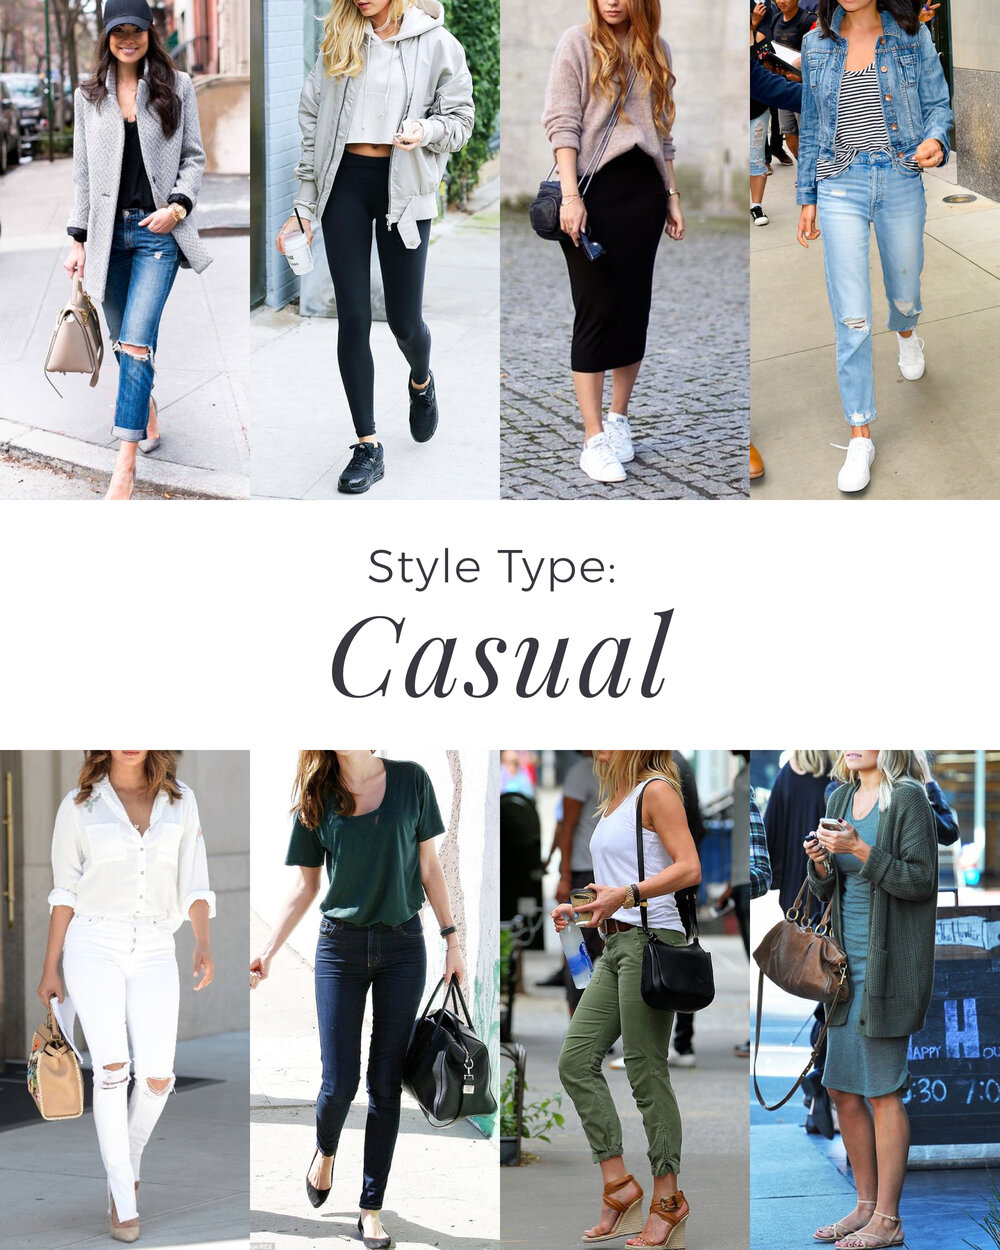 How To Find Your Personal Style | Simplified Wardrobe